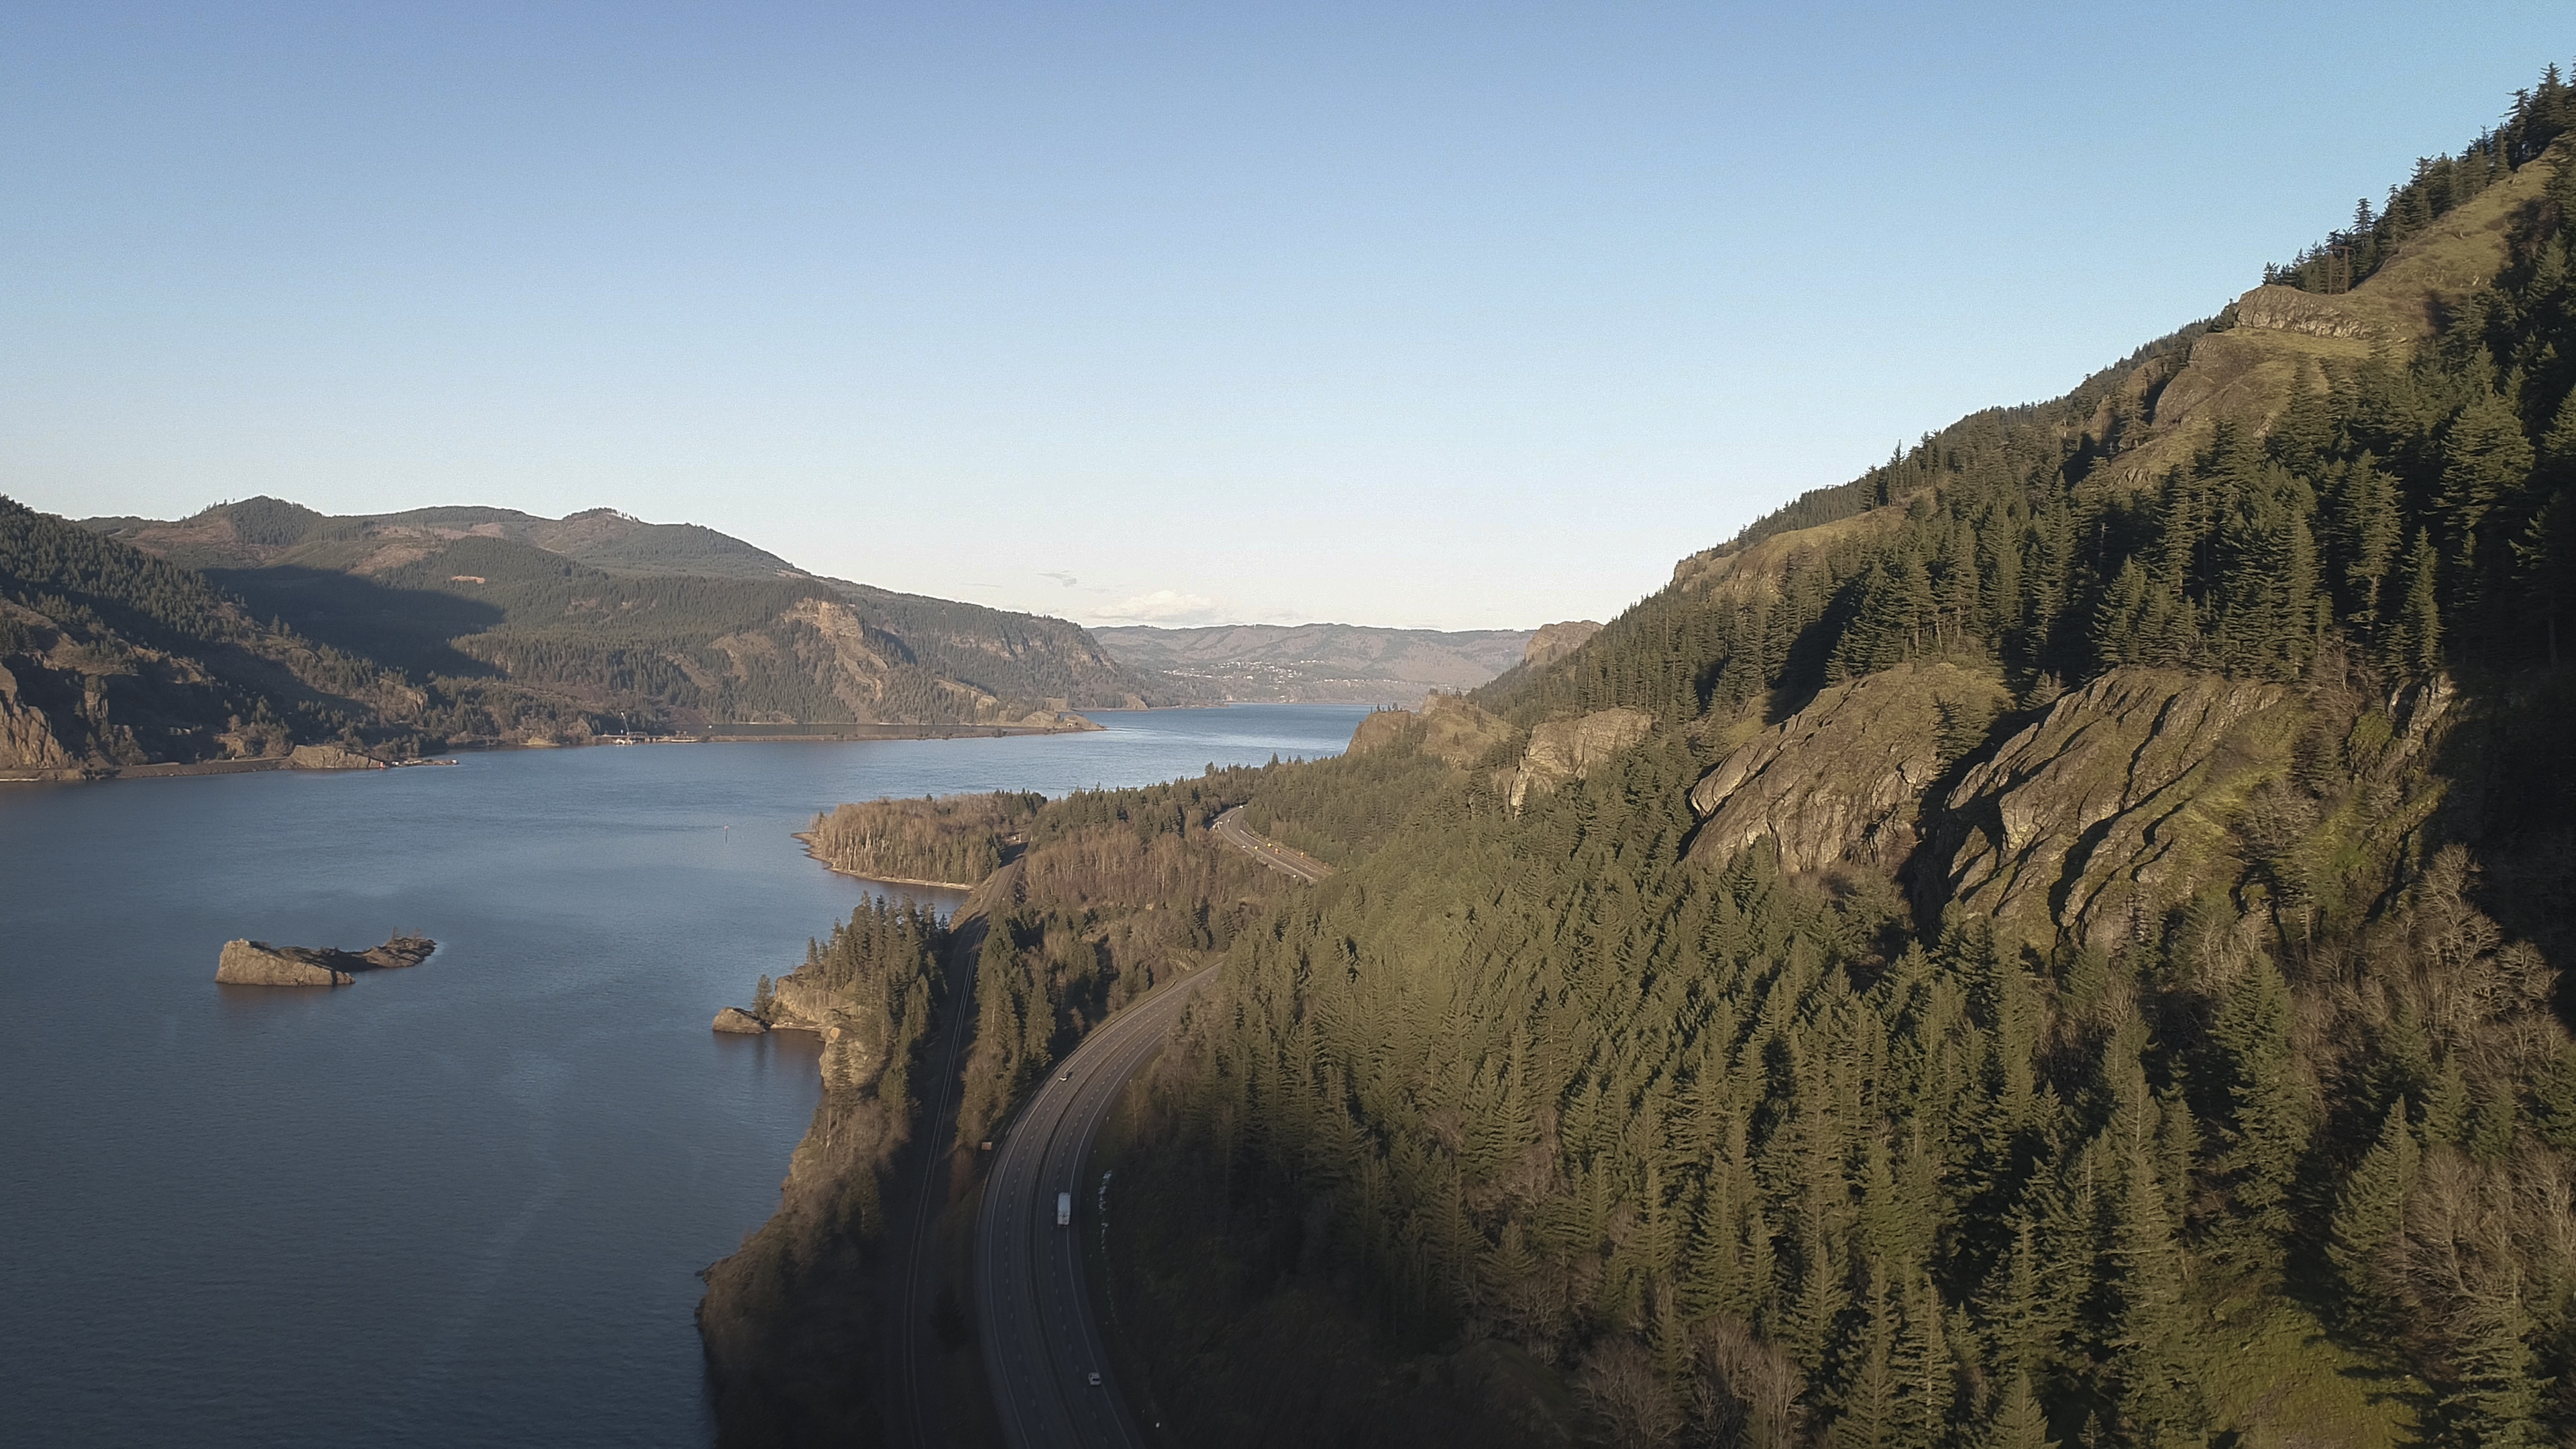 Take a zigzag road trip through the Columbia River Gorge – Here is